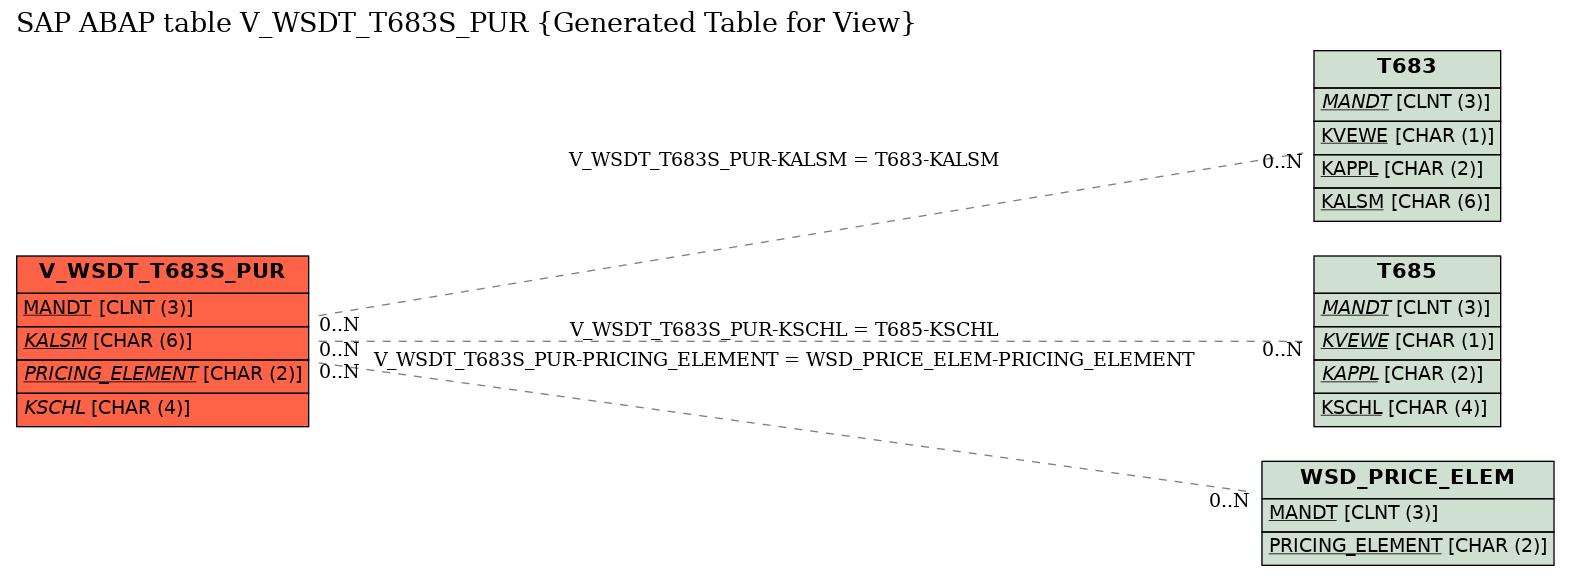 E-R Diagram for table V_WSDT_T683S_PUR (Generated Table for View)